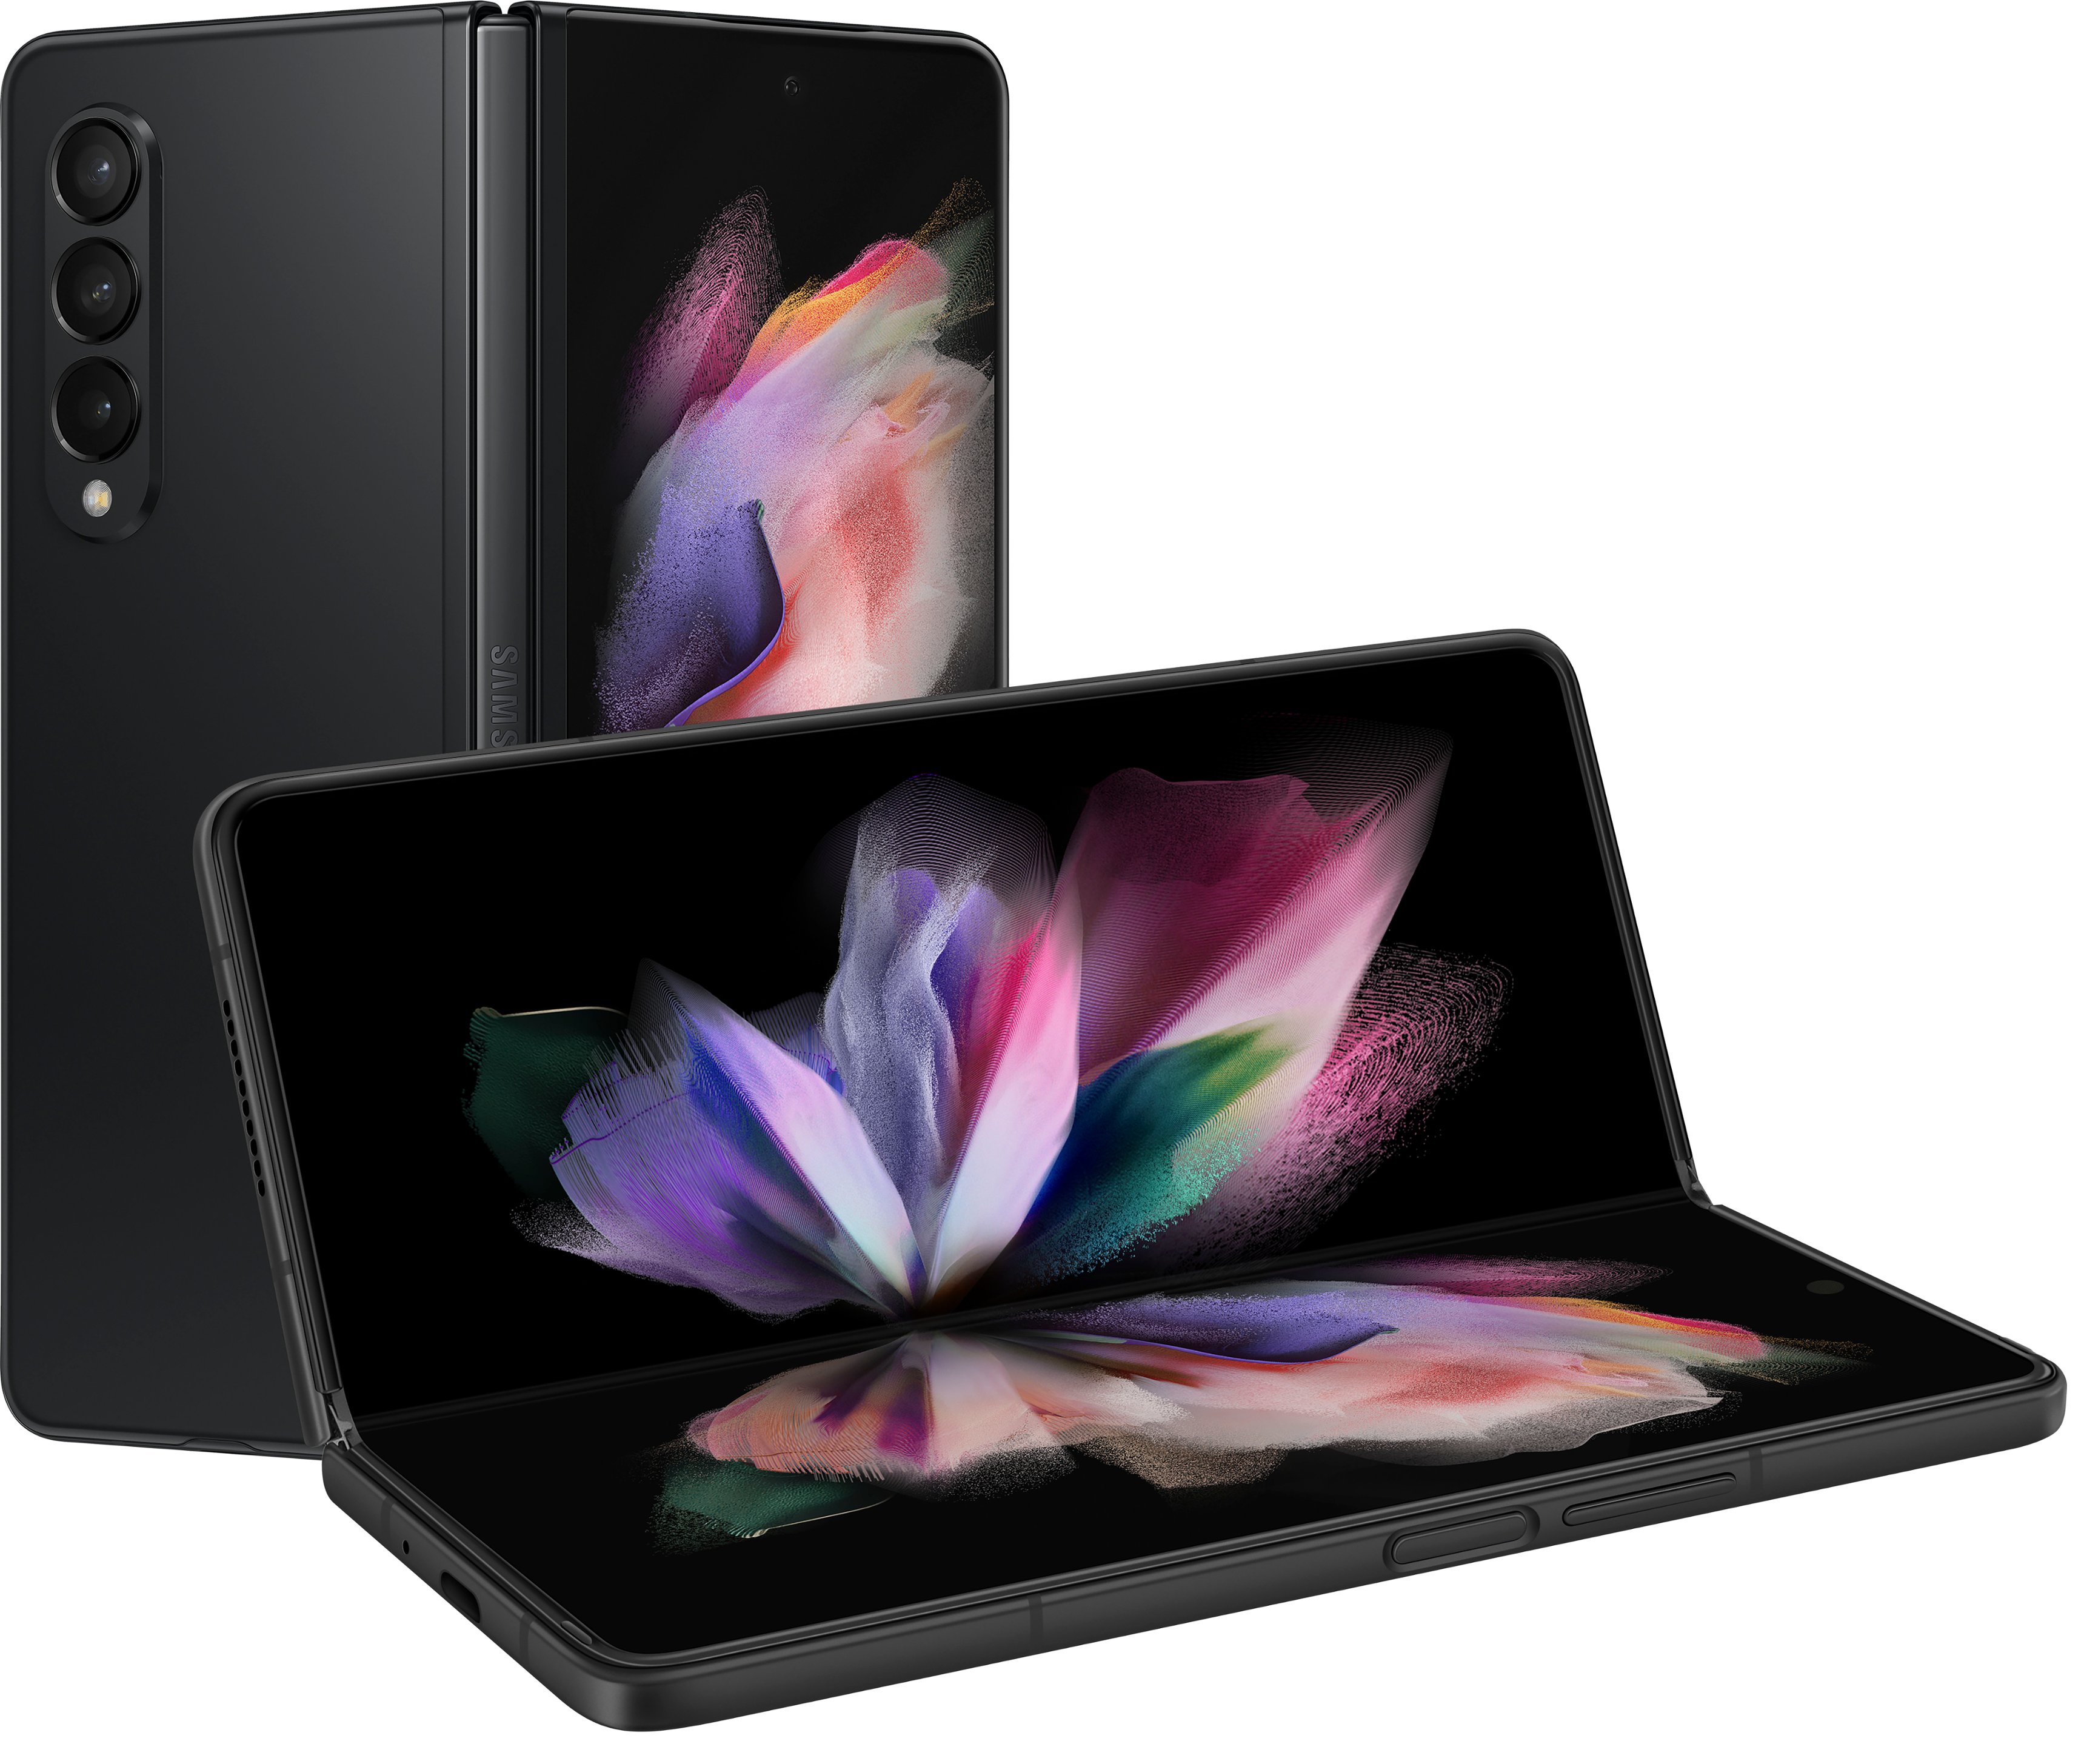 AT&T Galaxy Z Fold 3 WAS $1799.99 NOW $1299.99 SAVE $500 + up to $800 off with trade-in